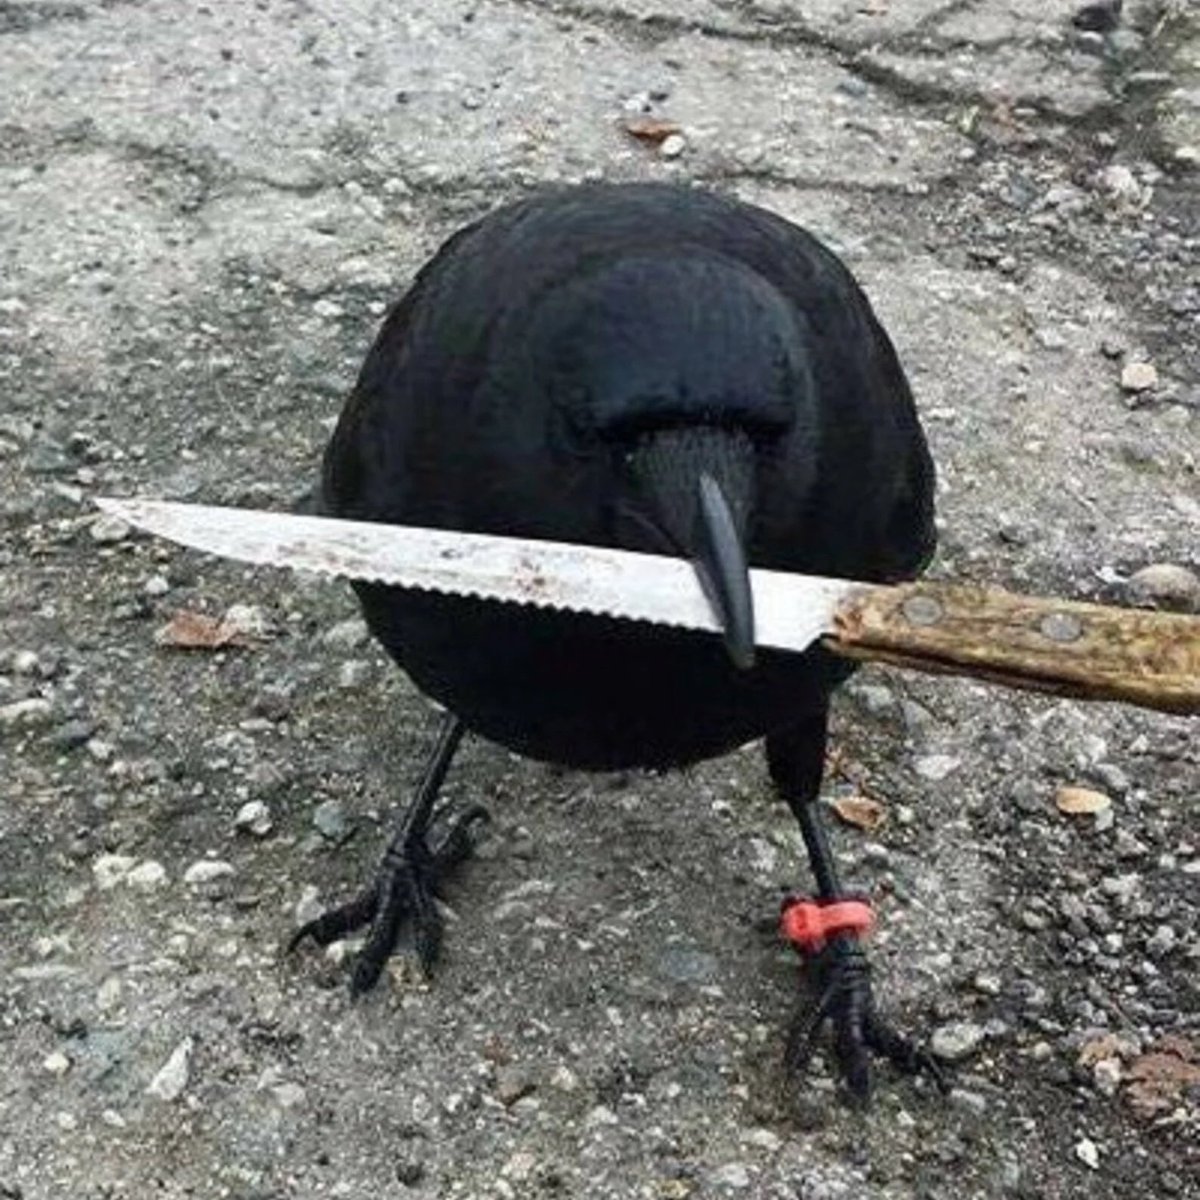 @MEXC_Official Crow with knife